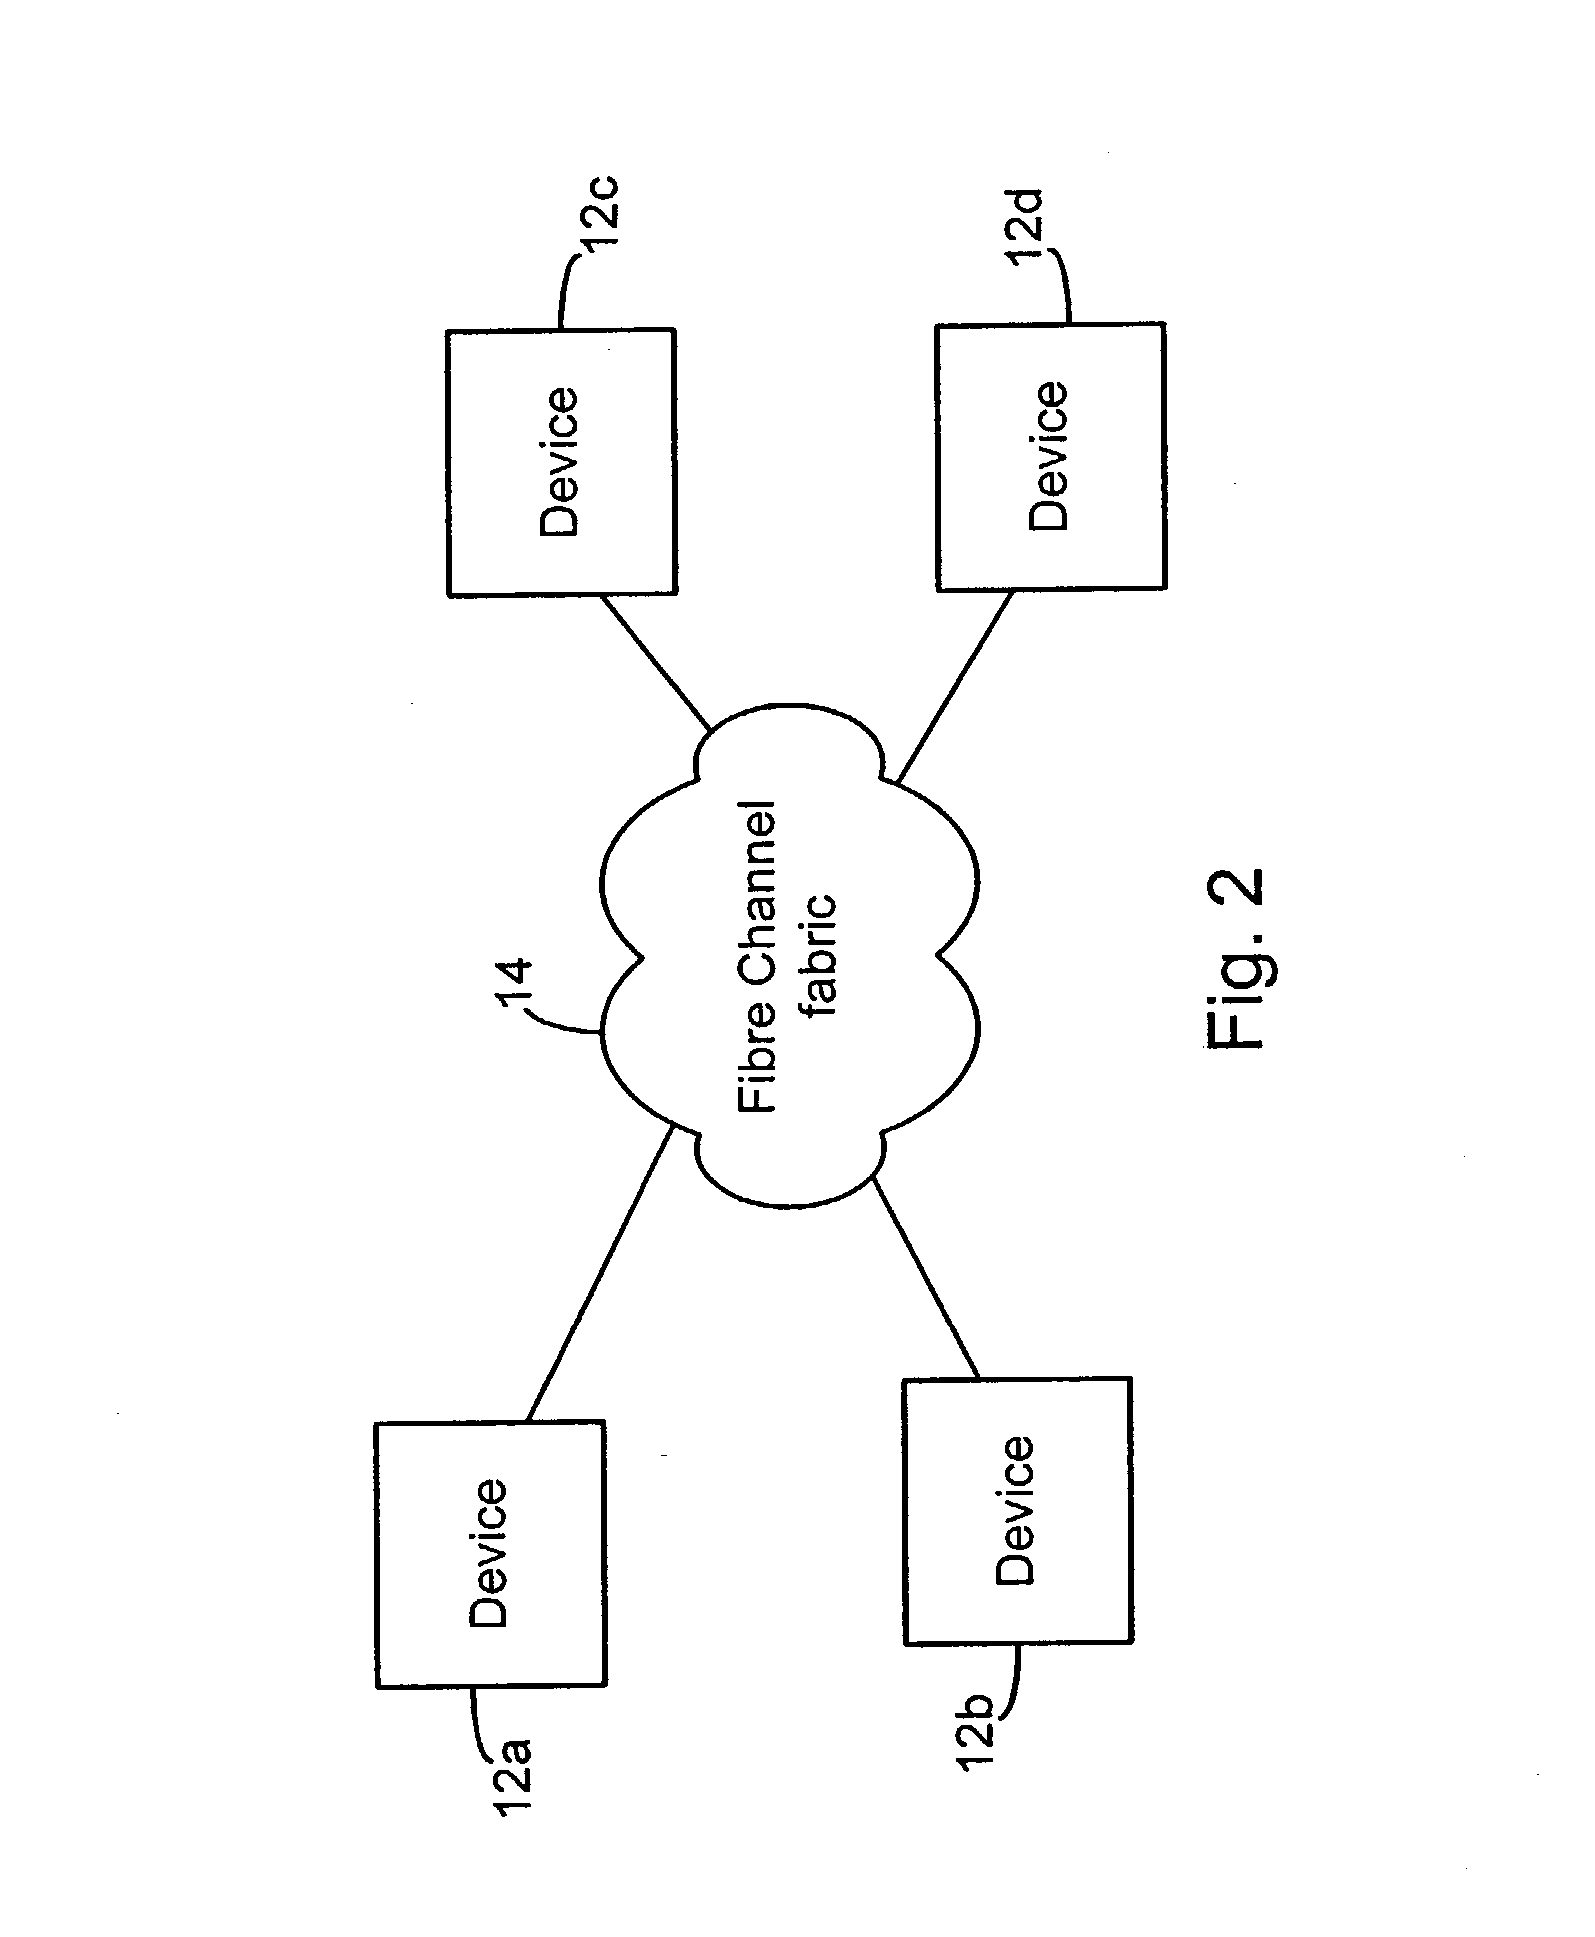 Systems and methods for providing quality of service (QoS) in an environment that does not normally support QoS features